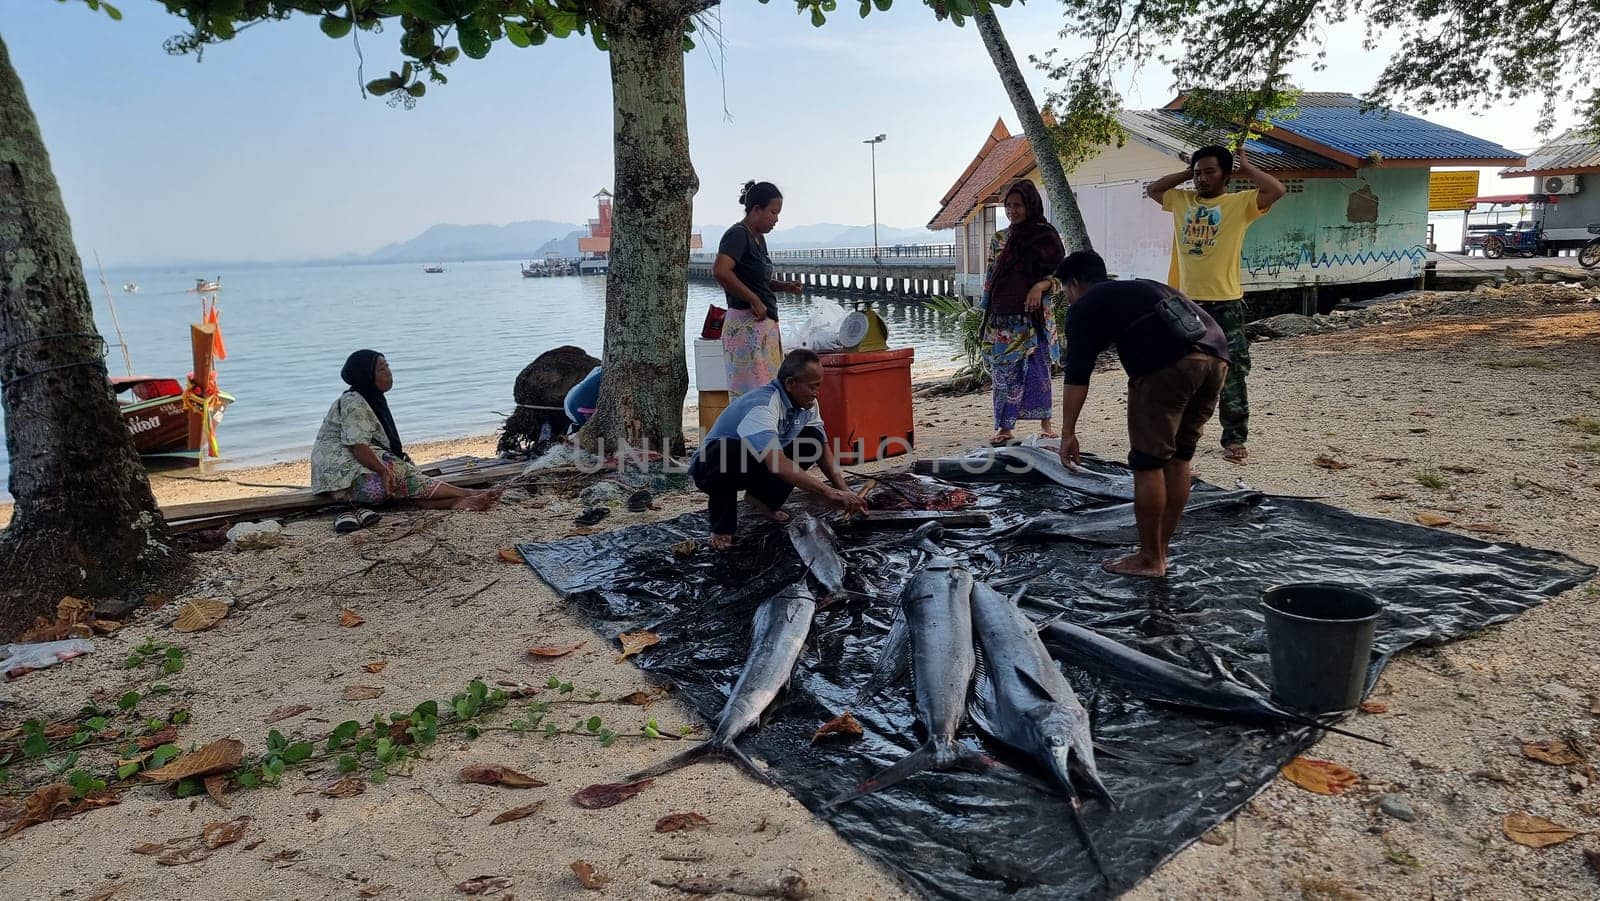 Koh Mook Thailand 20 January 2024, A tribe of people stand on a sandy beach selling big fish, united in their shared awe and appreciation of the stunning natural beauty before them.